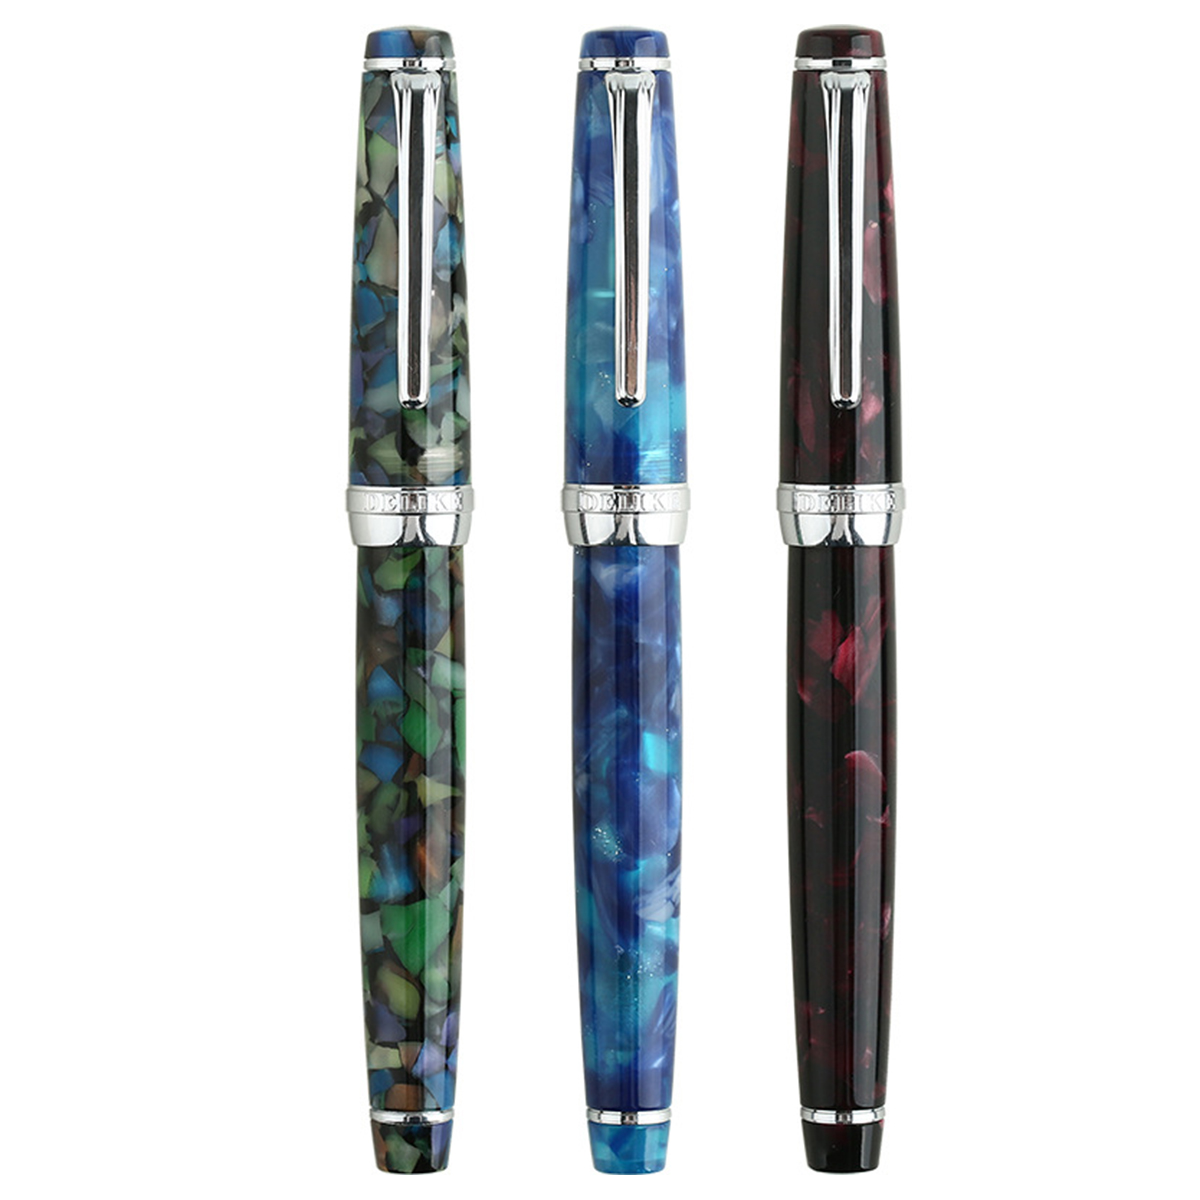 

MOONMAN DELIKE Fountain Pen Newmoon Series Acrylic Resin EF/F/Small Bent Writing Pen Gift Set for Business Office